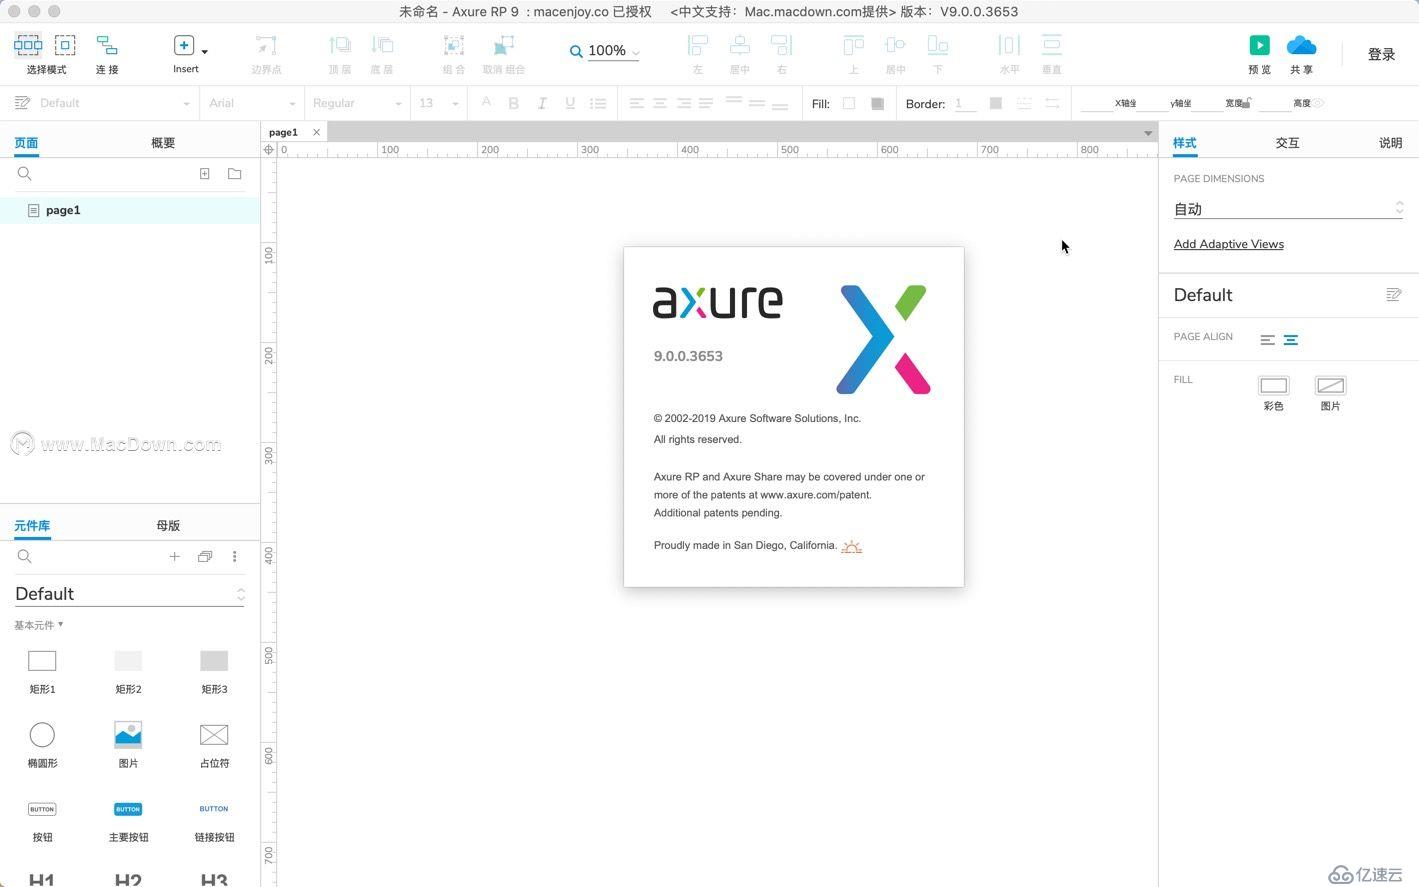 axure rp 9 update stalled